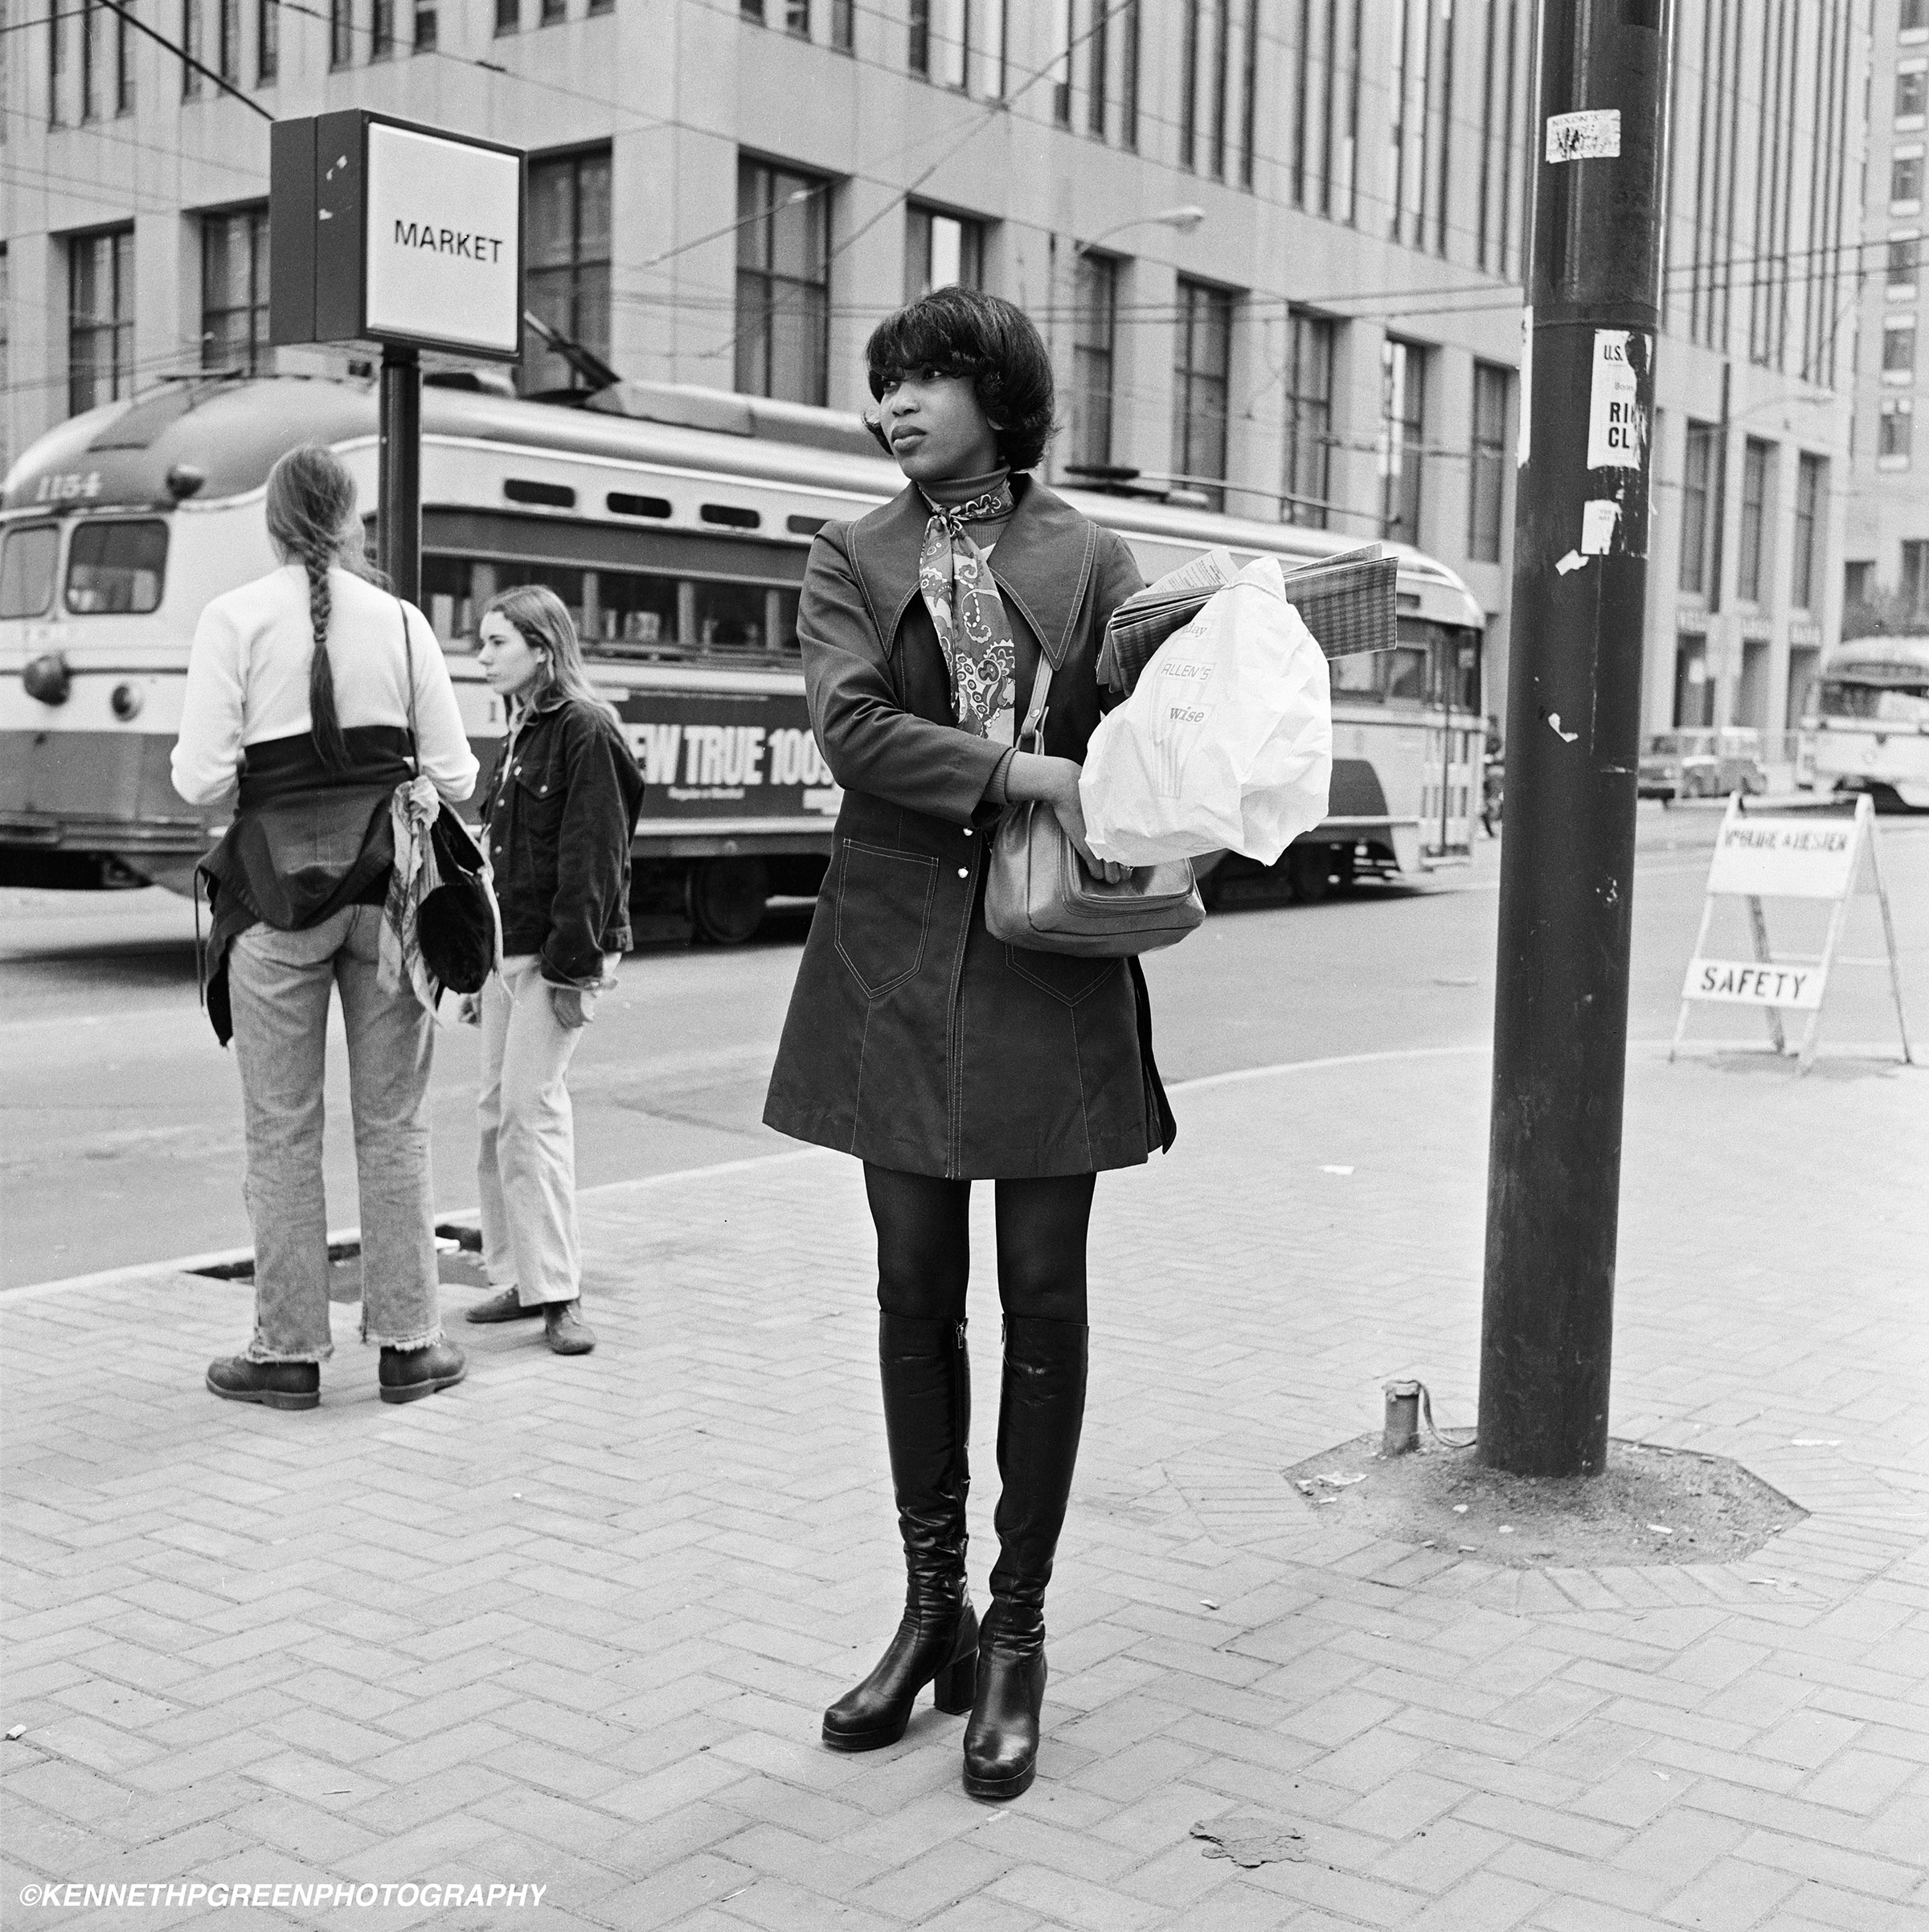 A woman wearing black boots and holding a bag stand on the sidewalk surrounded by buildings.